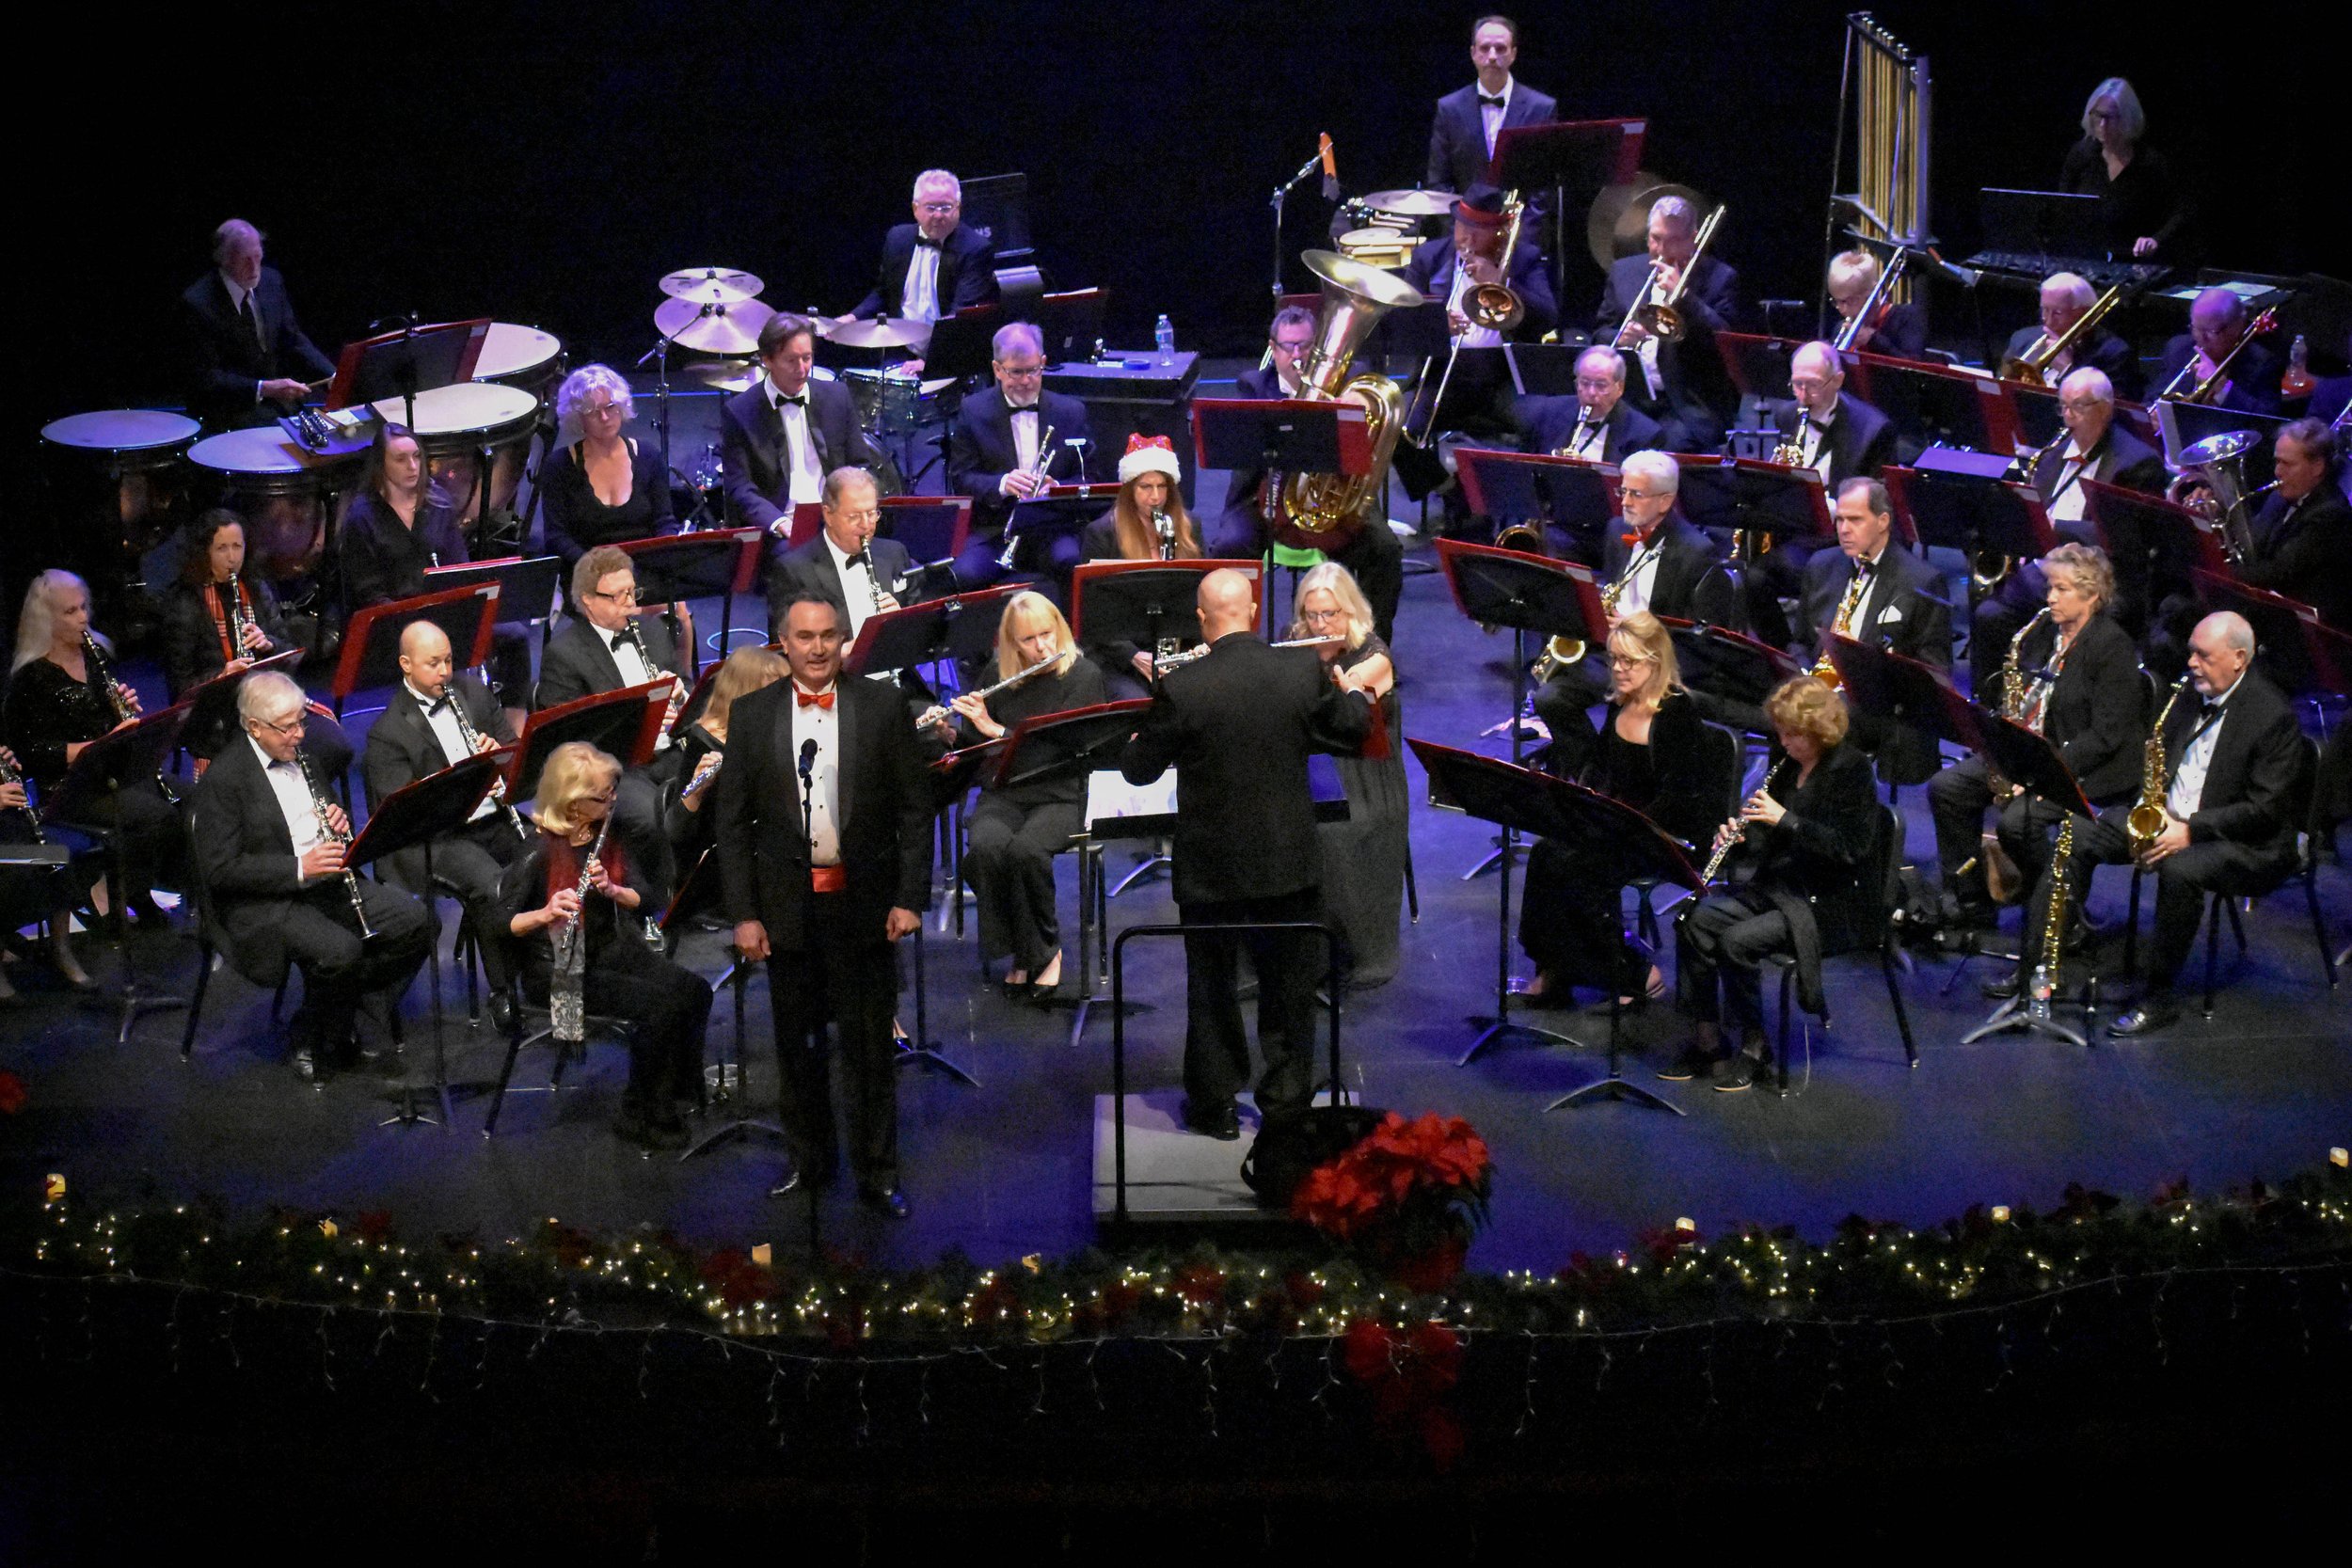 12-19-2021 LCB Holiday Concert by Peyton Webster75-31.jpg